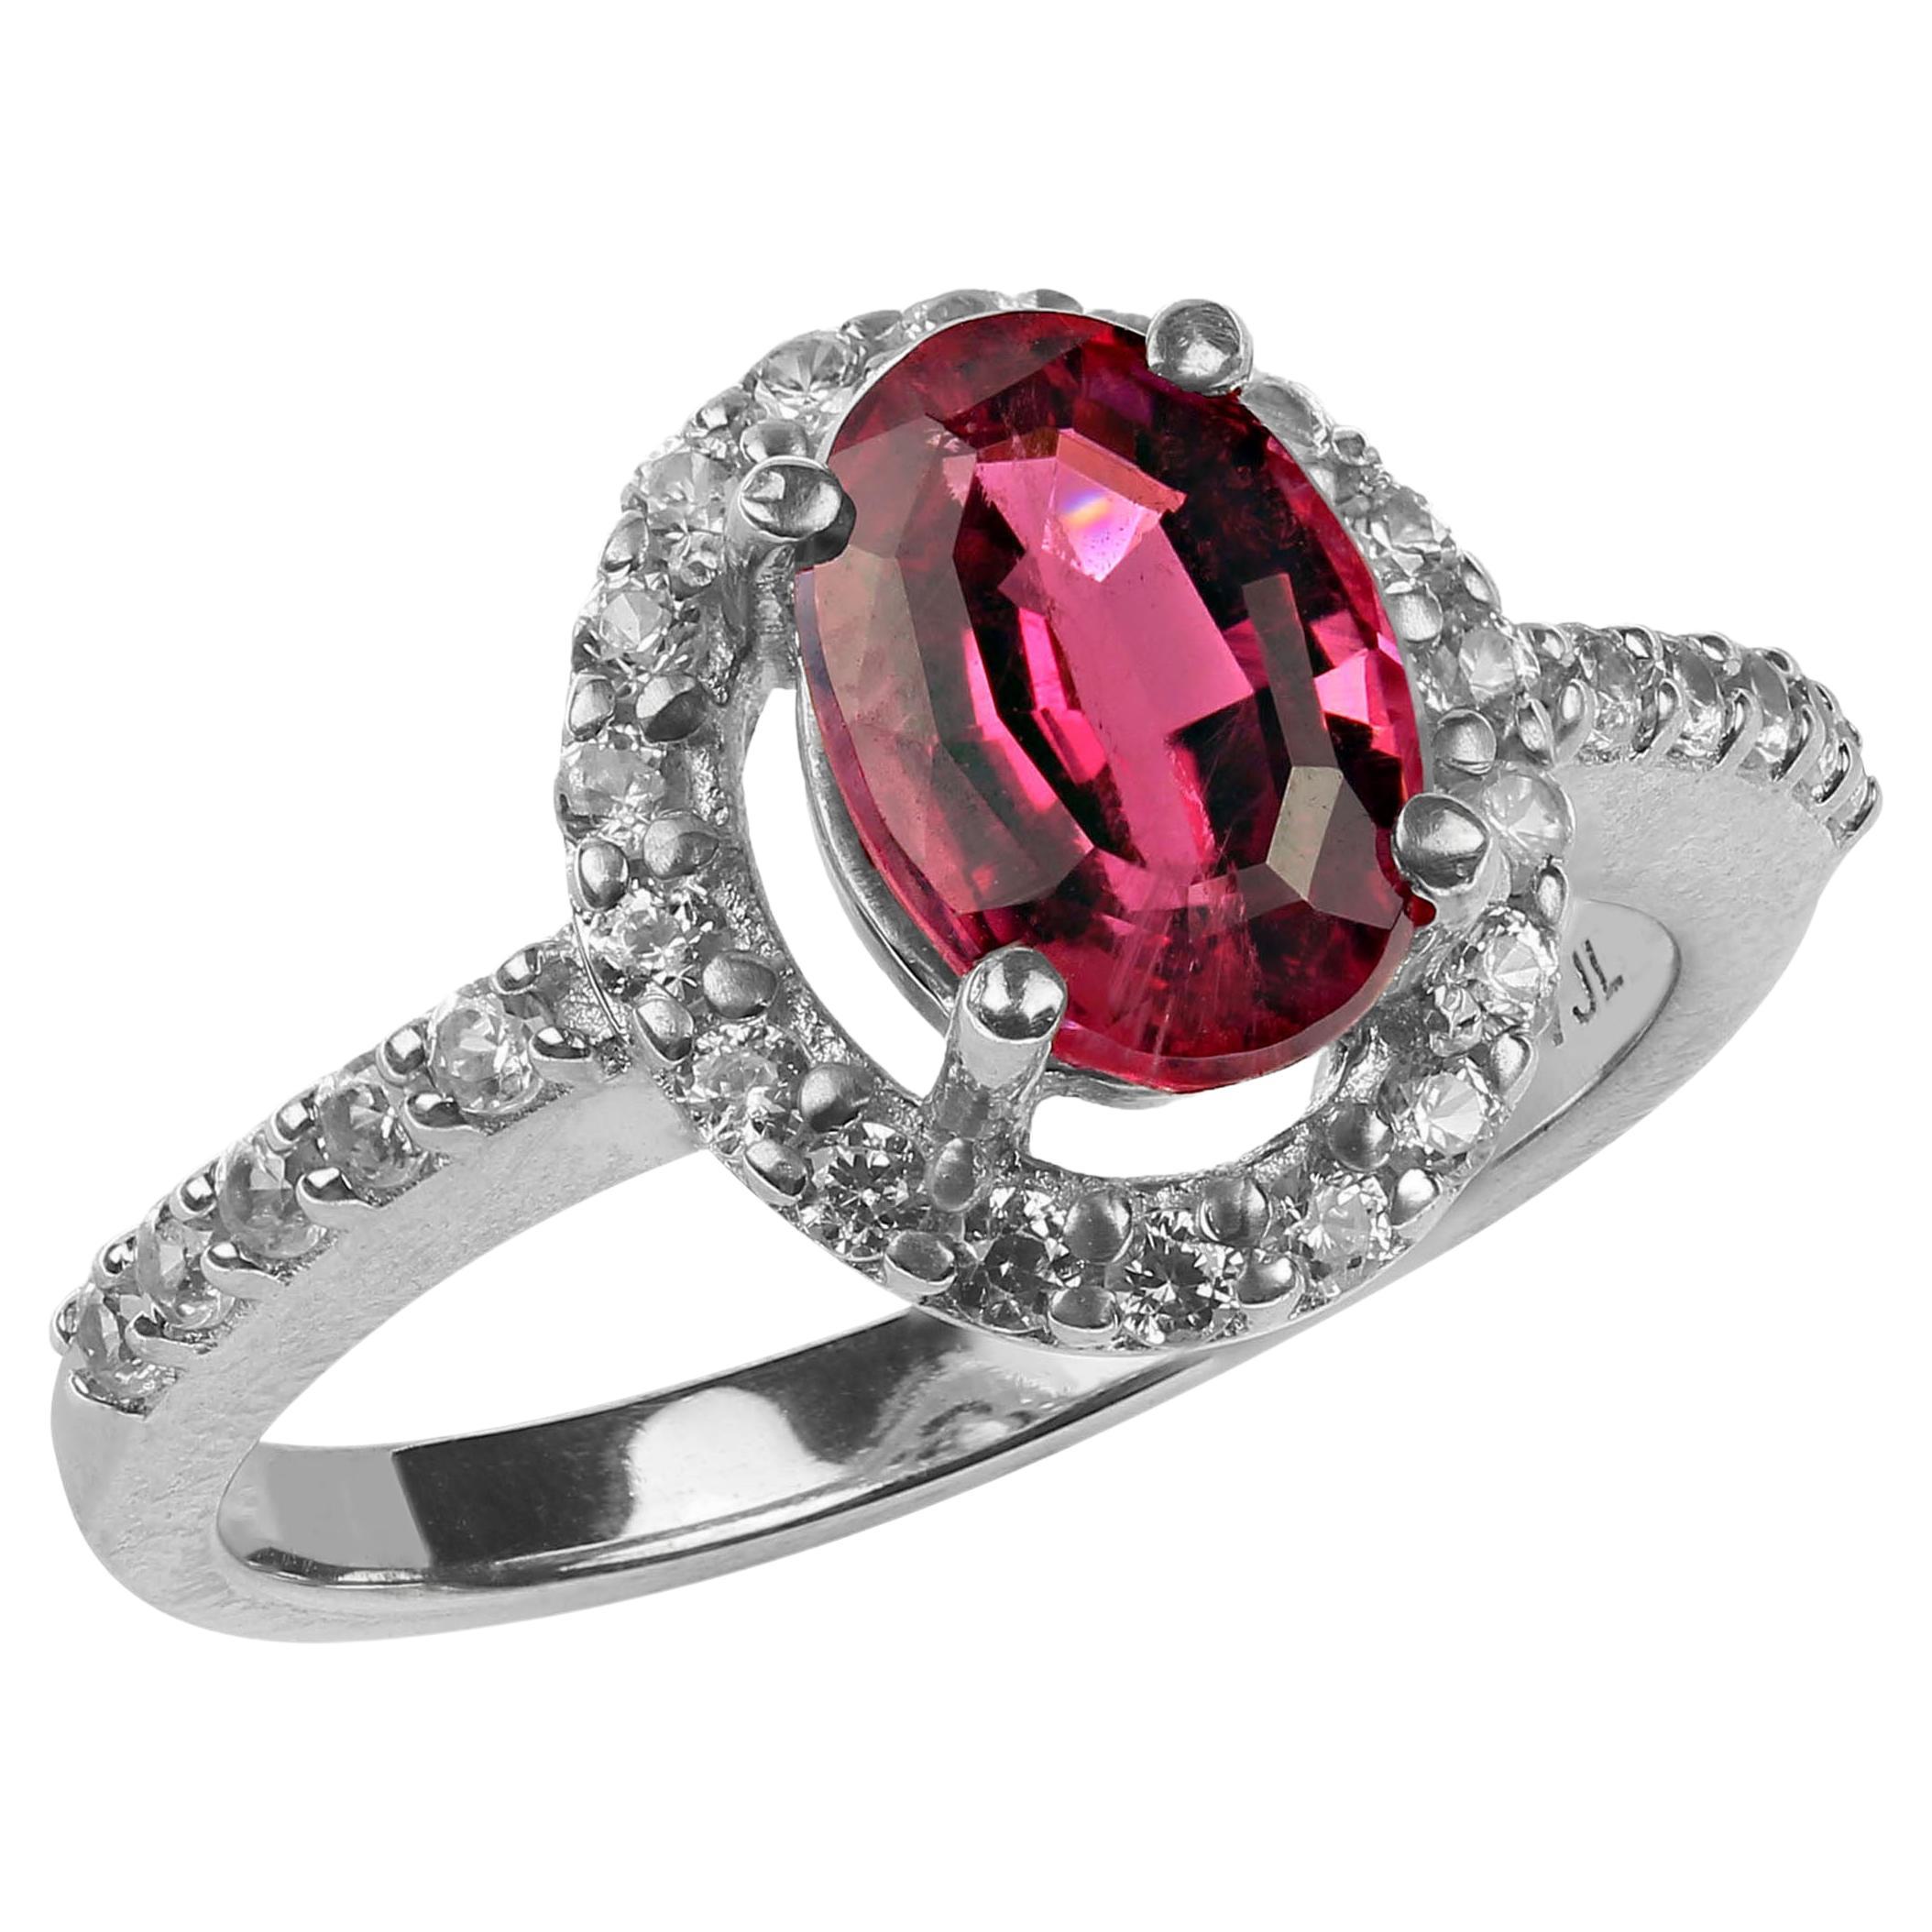 Glittering 1.6ct oval rubelite accented with 0.57ct of genuine white zircons all set in glowing sterling silver ring. This unique ring is a 'must have.'  The gorgeous step cut oval rubelite comes straight from one of our favorite vendors high in the